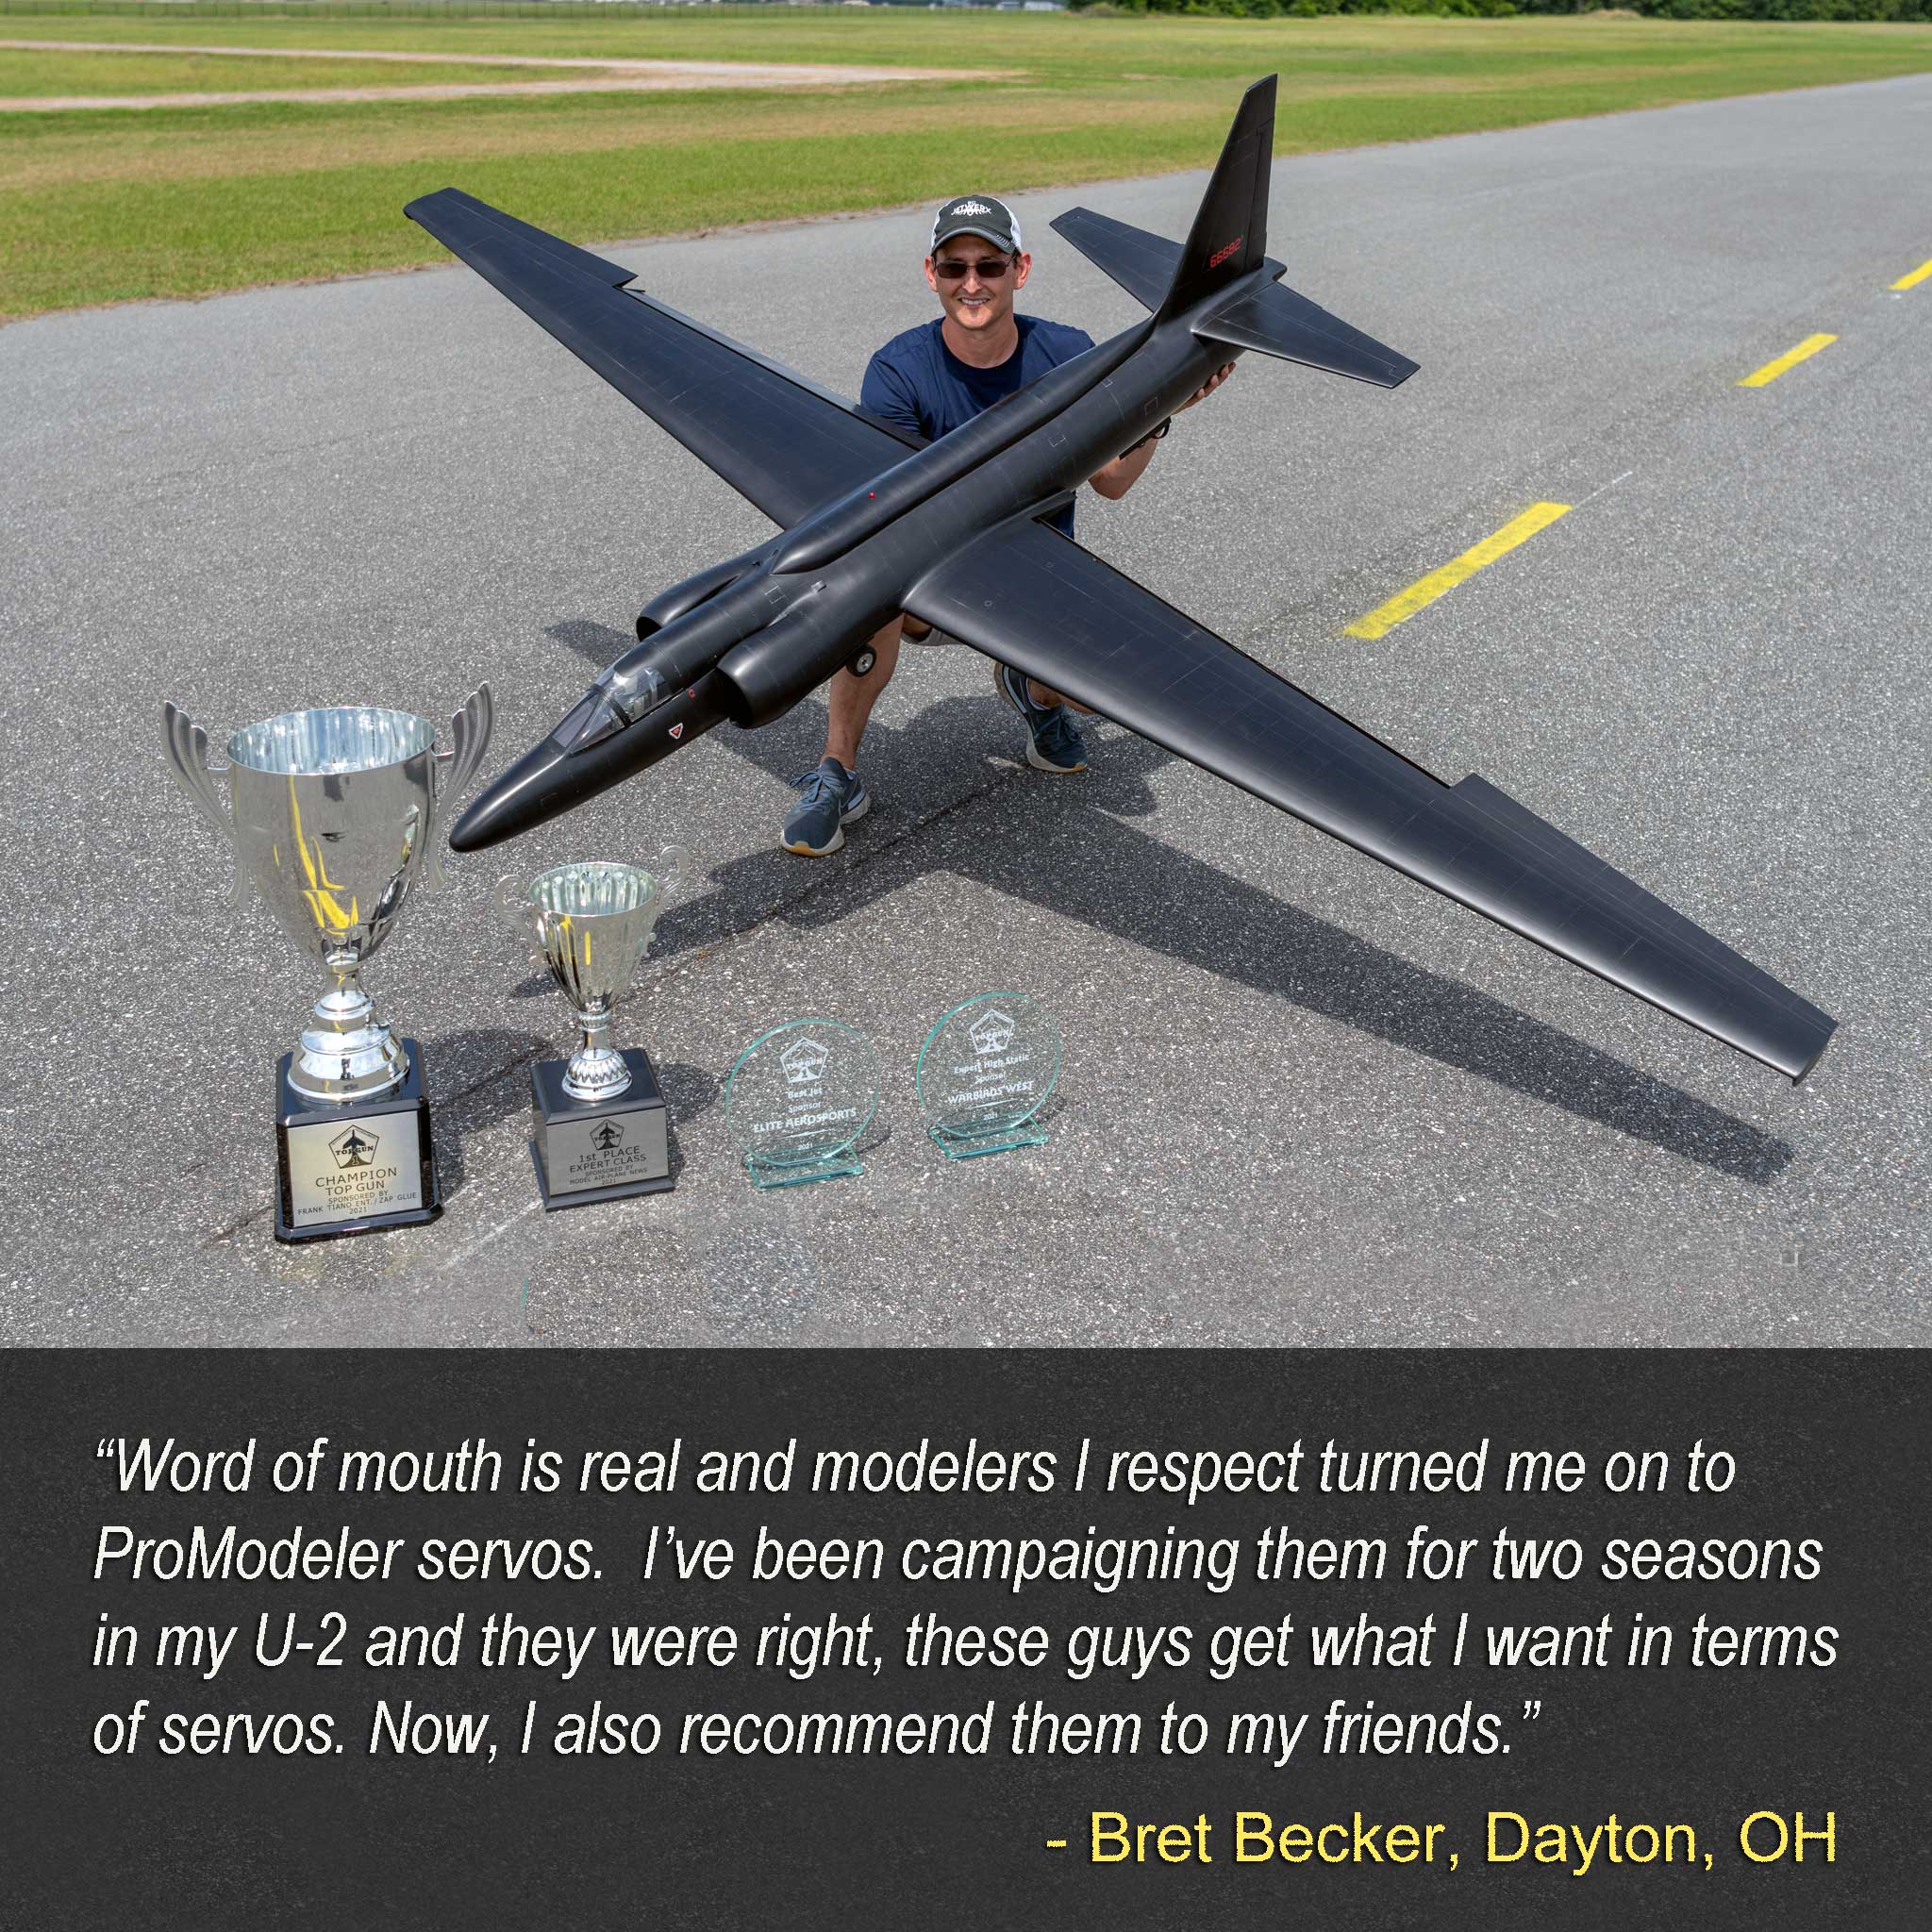 Bret Becker, Mr. Top Gun two years running along with his gorgeous U-2 model and his trophies